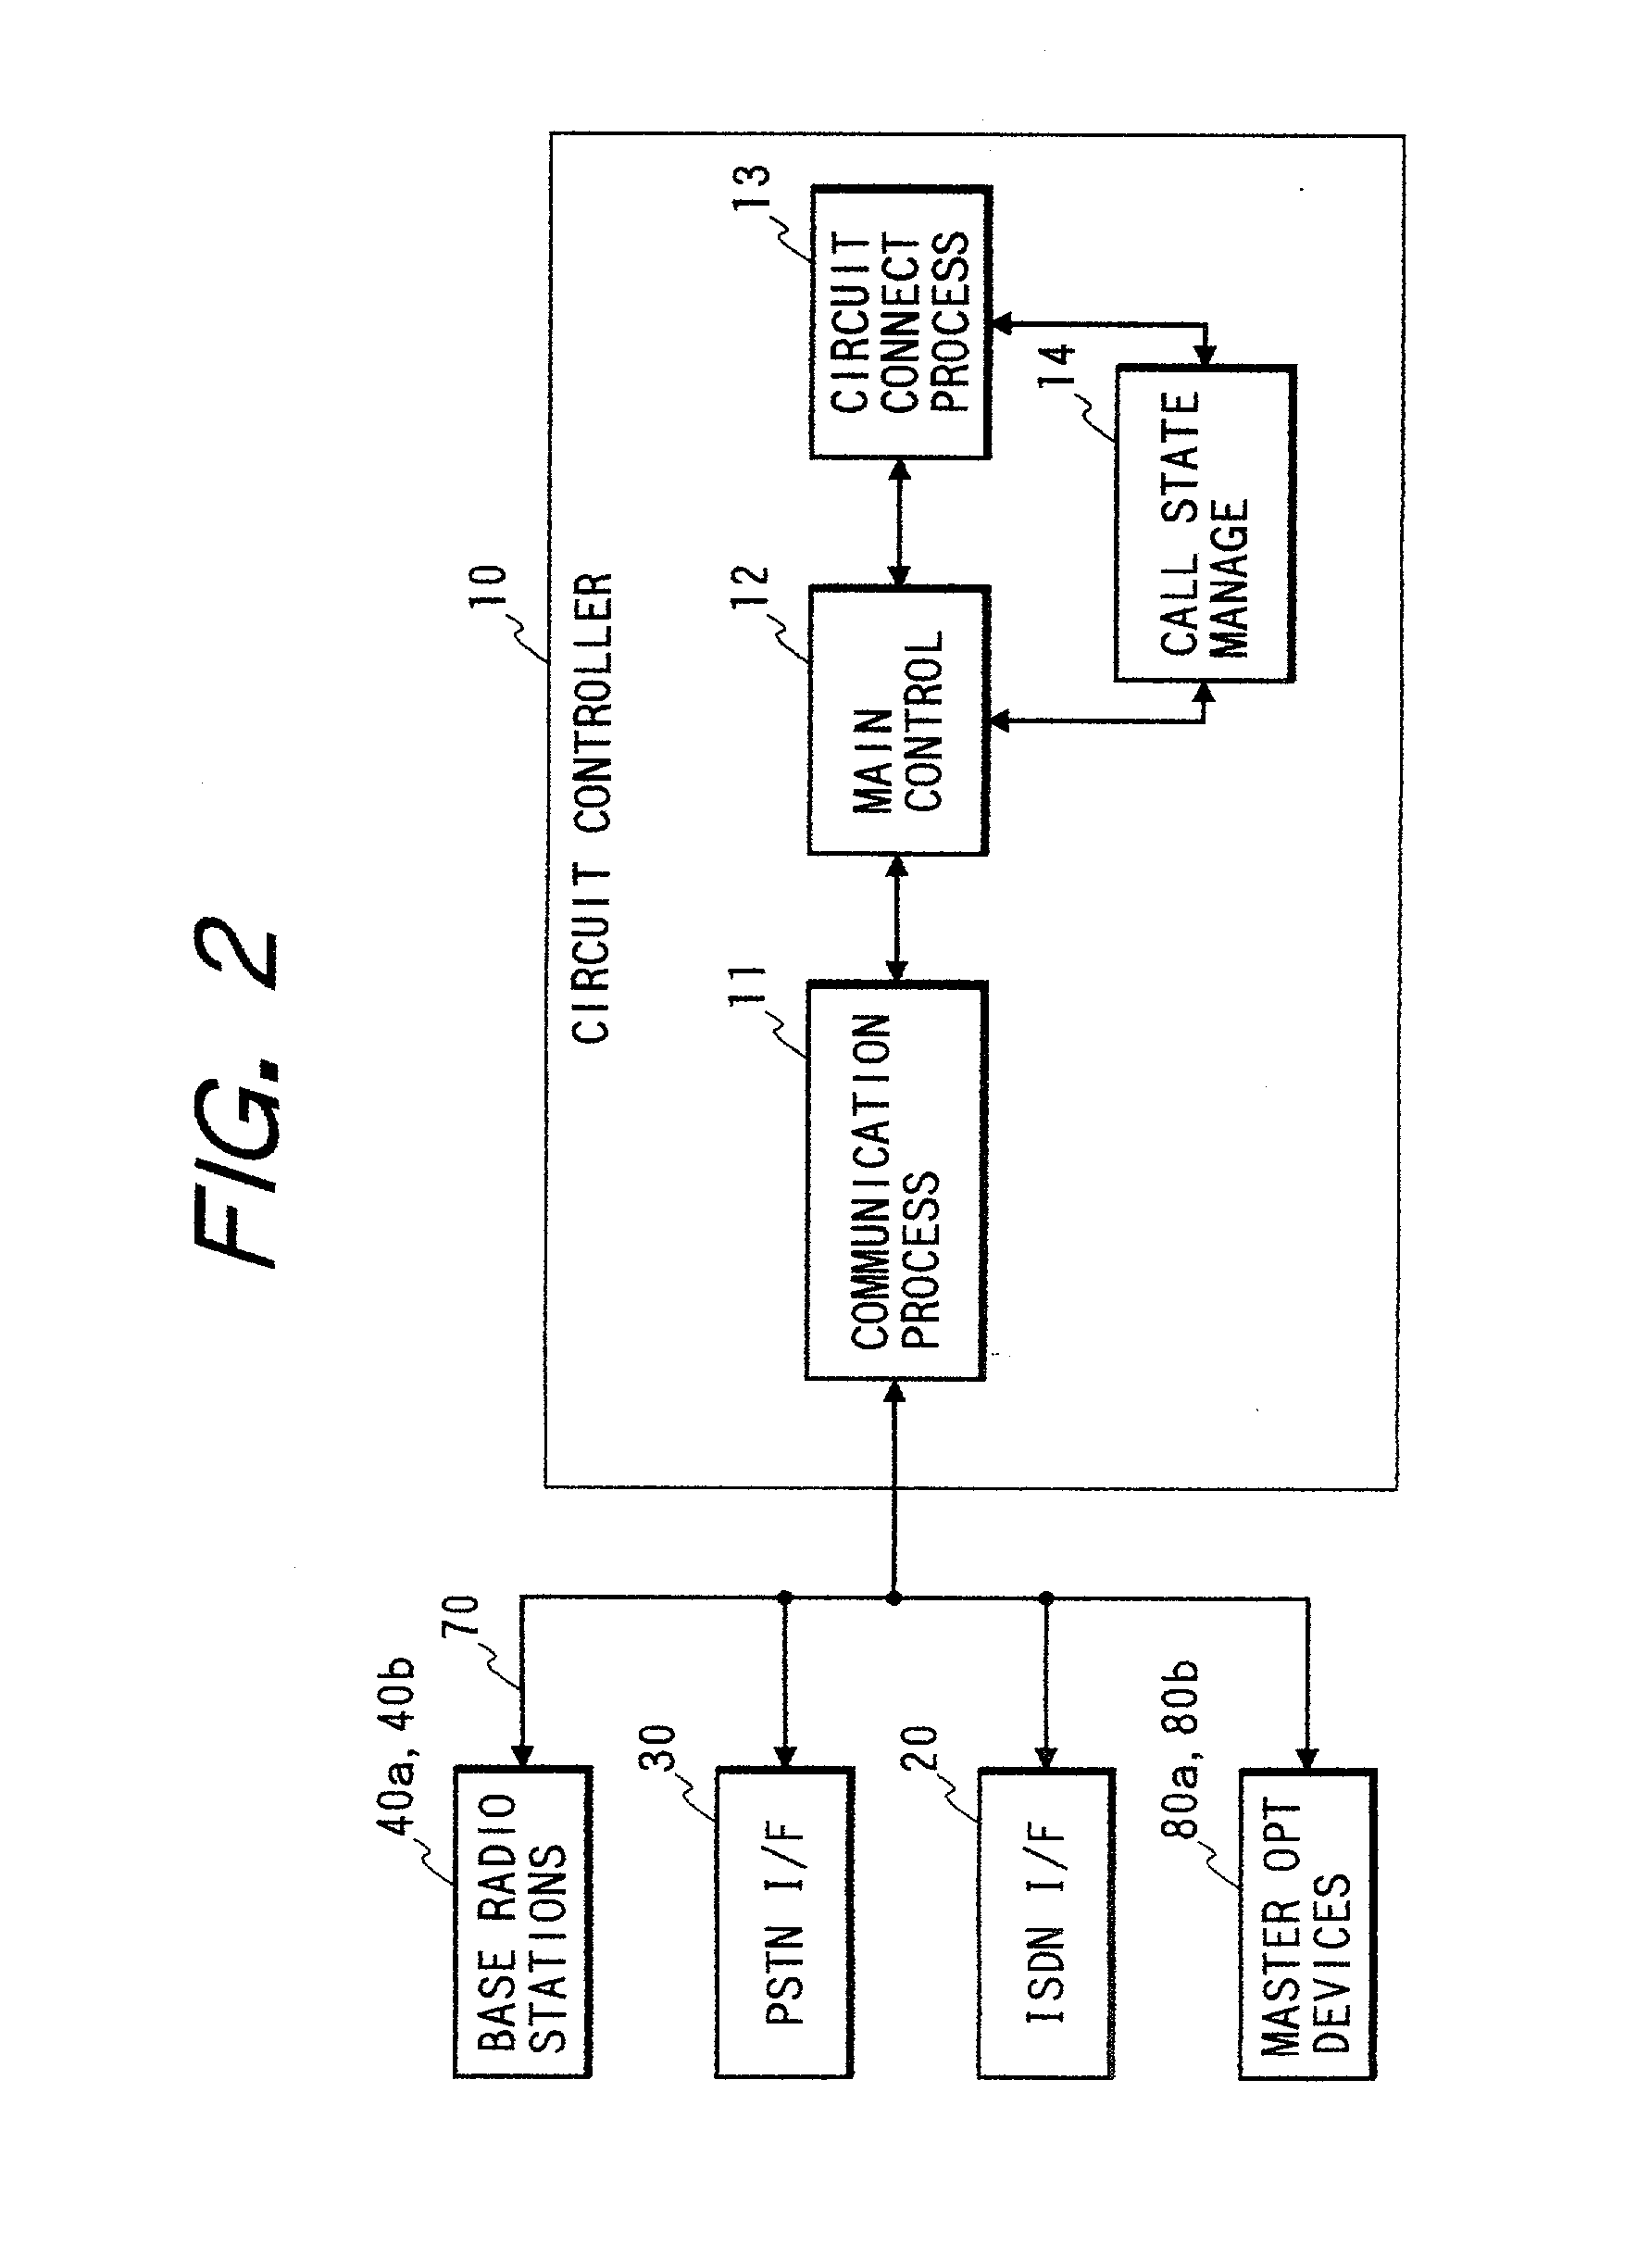 Communication system and circuit controller